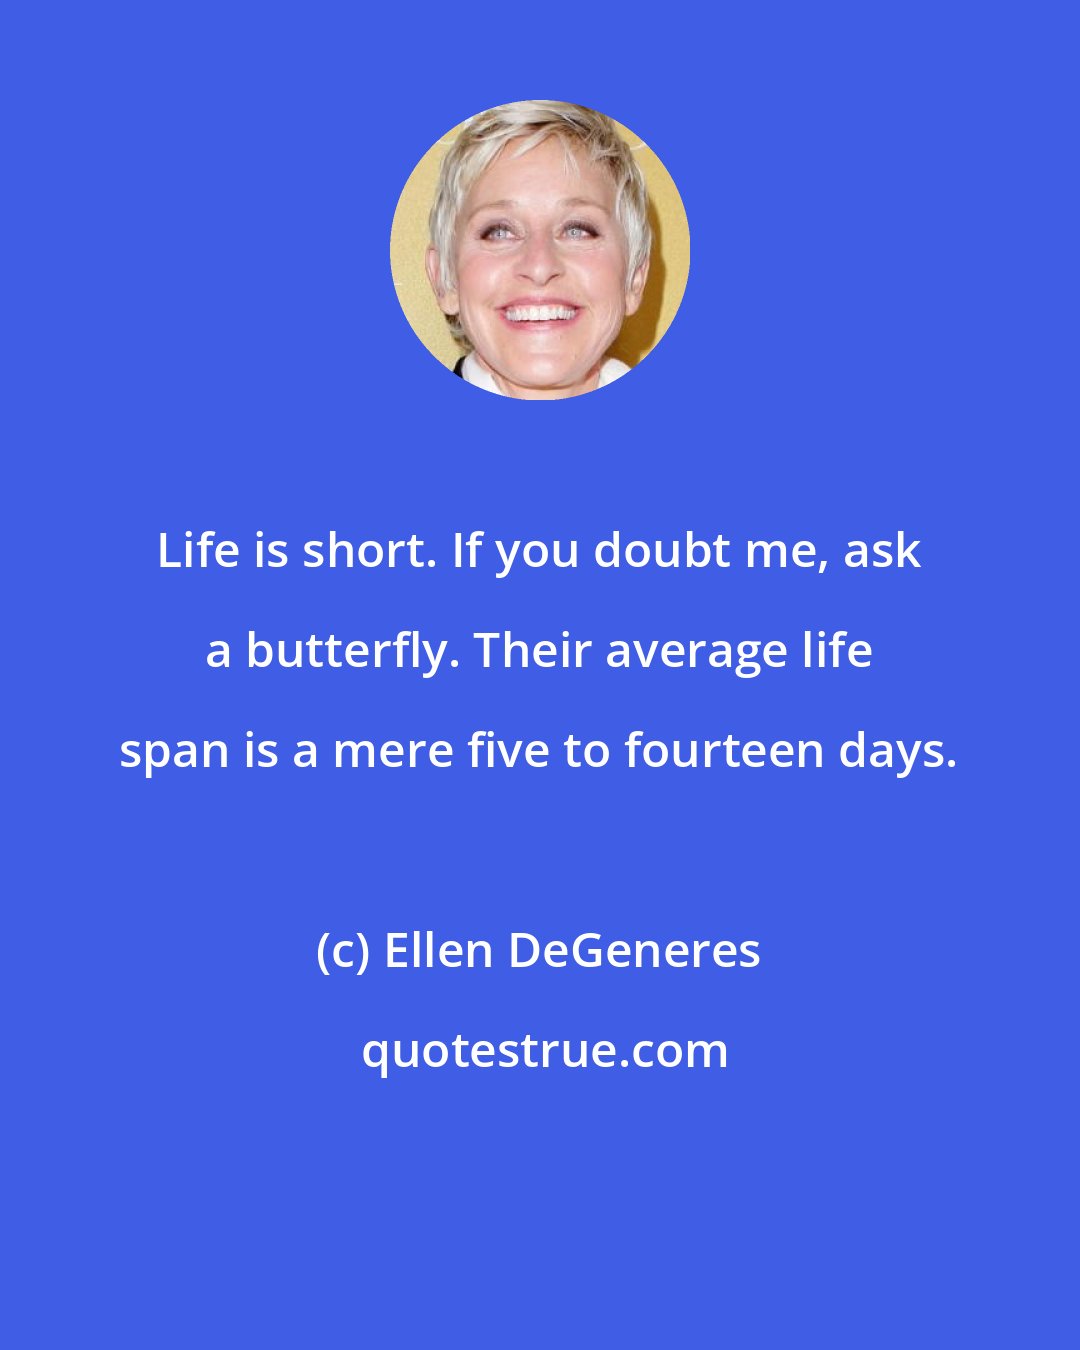 Ellen DeGeneres: Life is short. If you doubt me, ask a butterfly. Their average life span is a mere five to fourteen days.